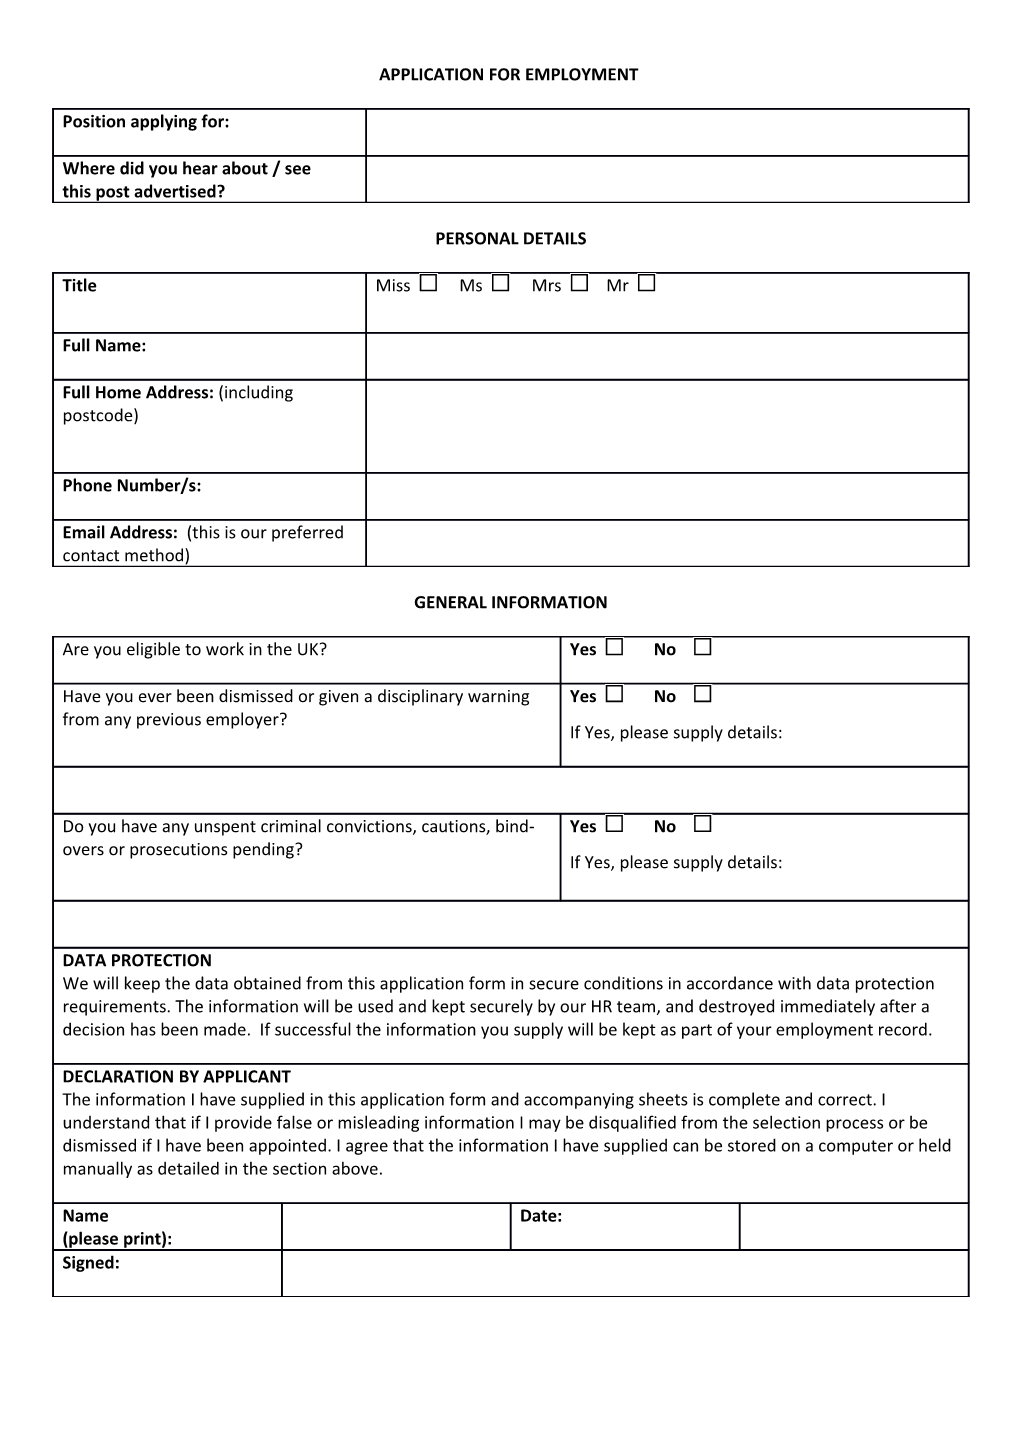 Application for Employment s184